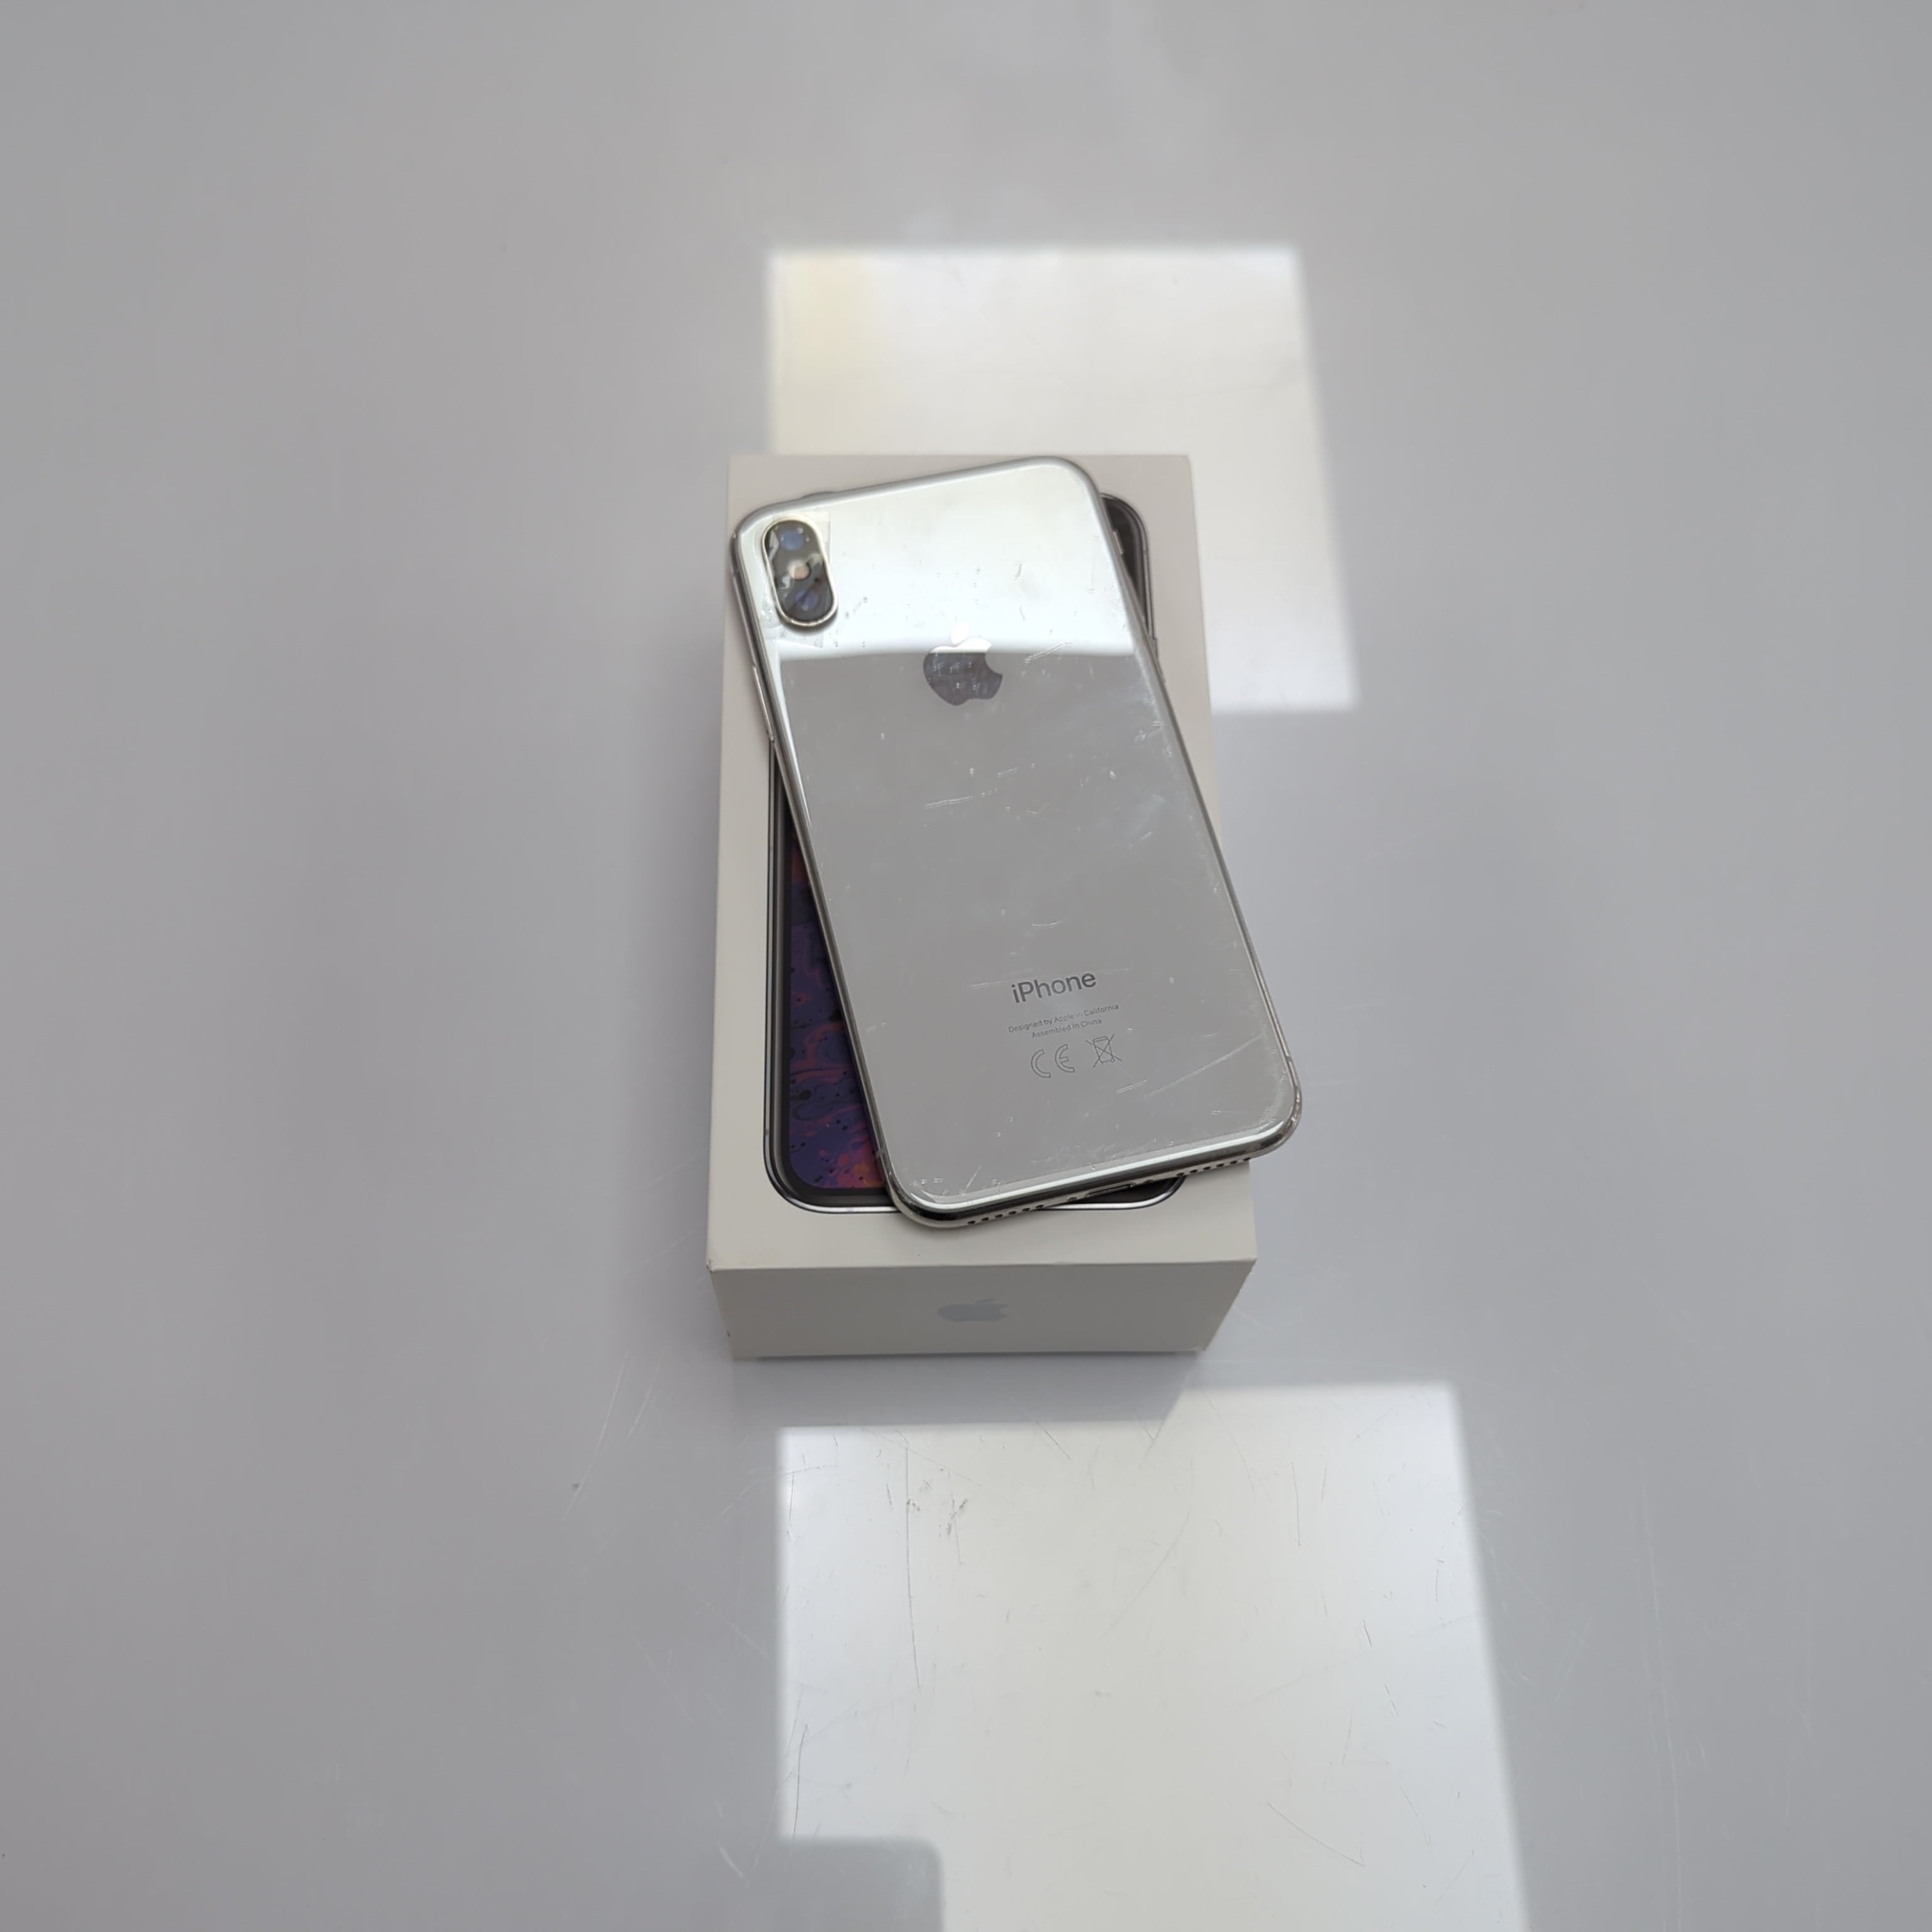 Apple iPhone X 64GB Silver (Unlocked) Excellent